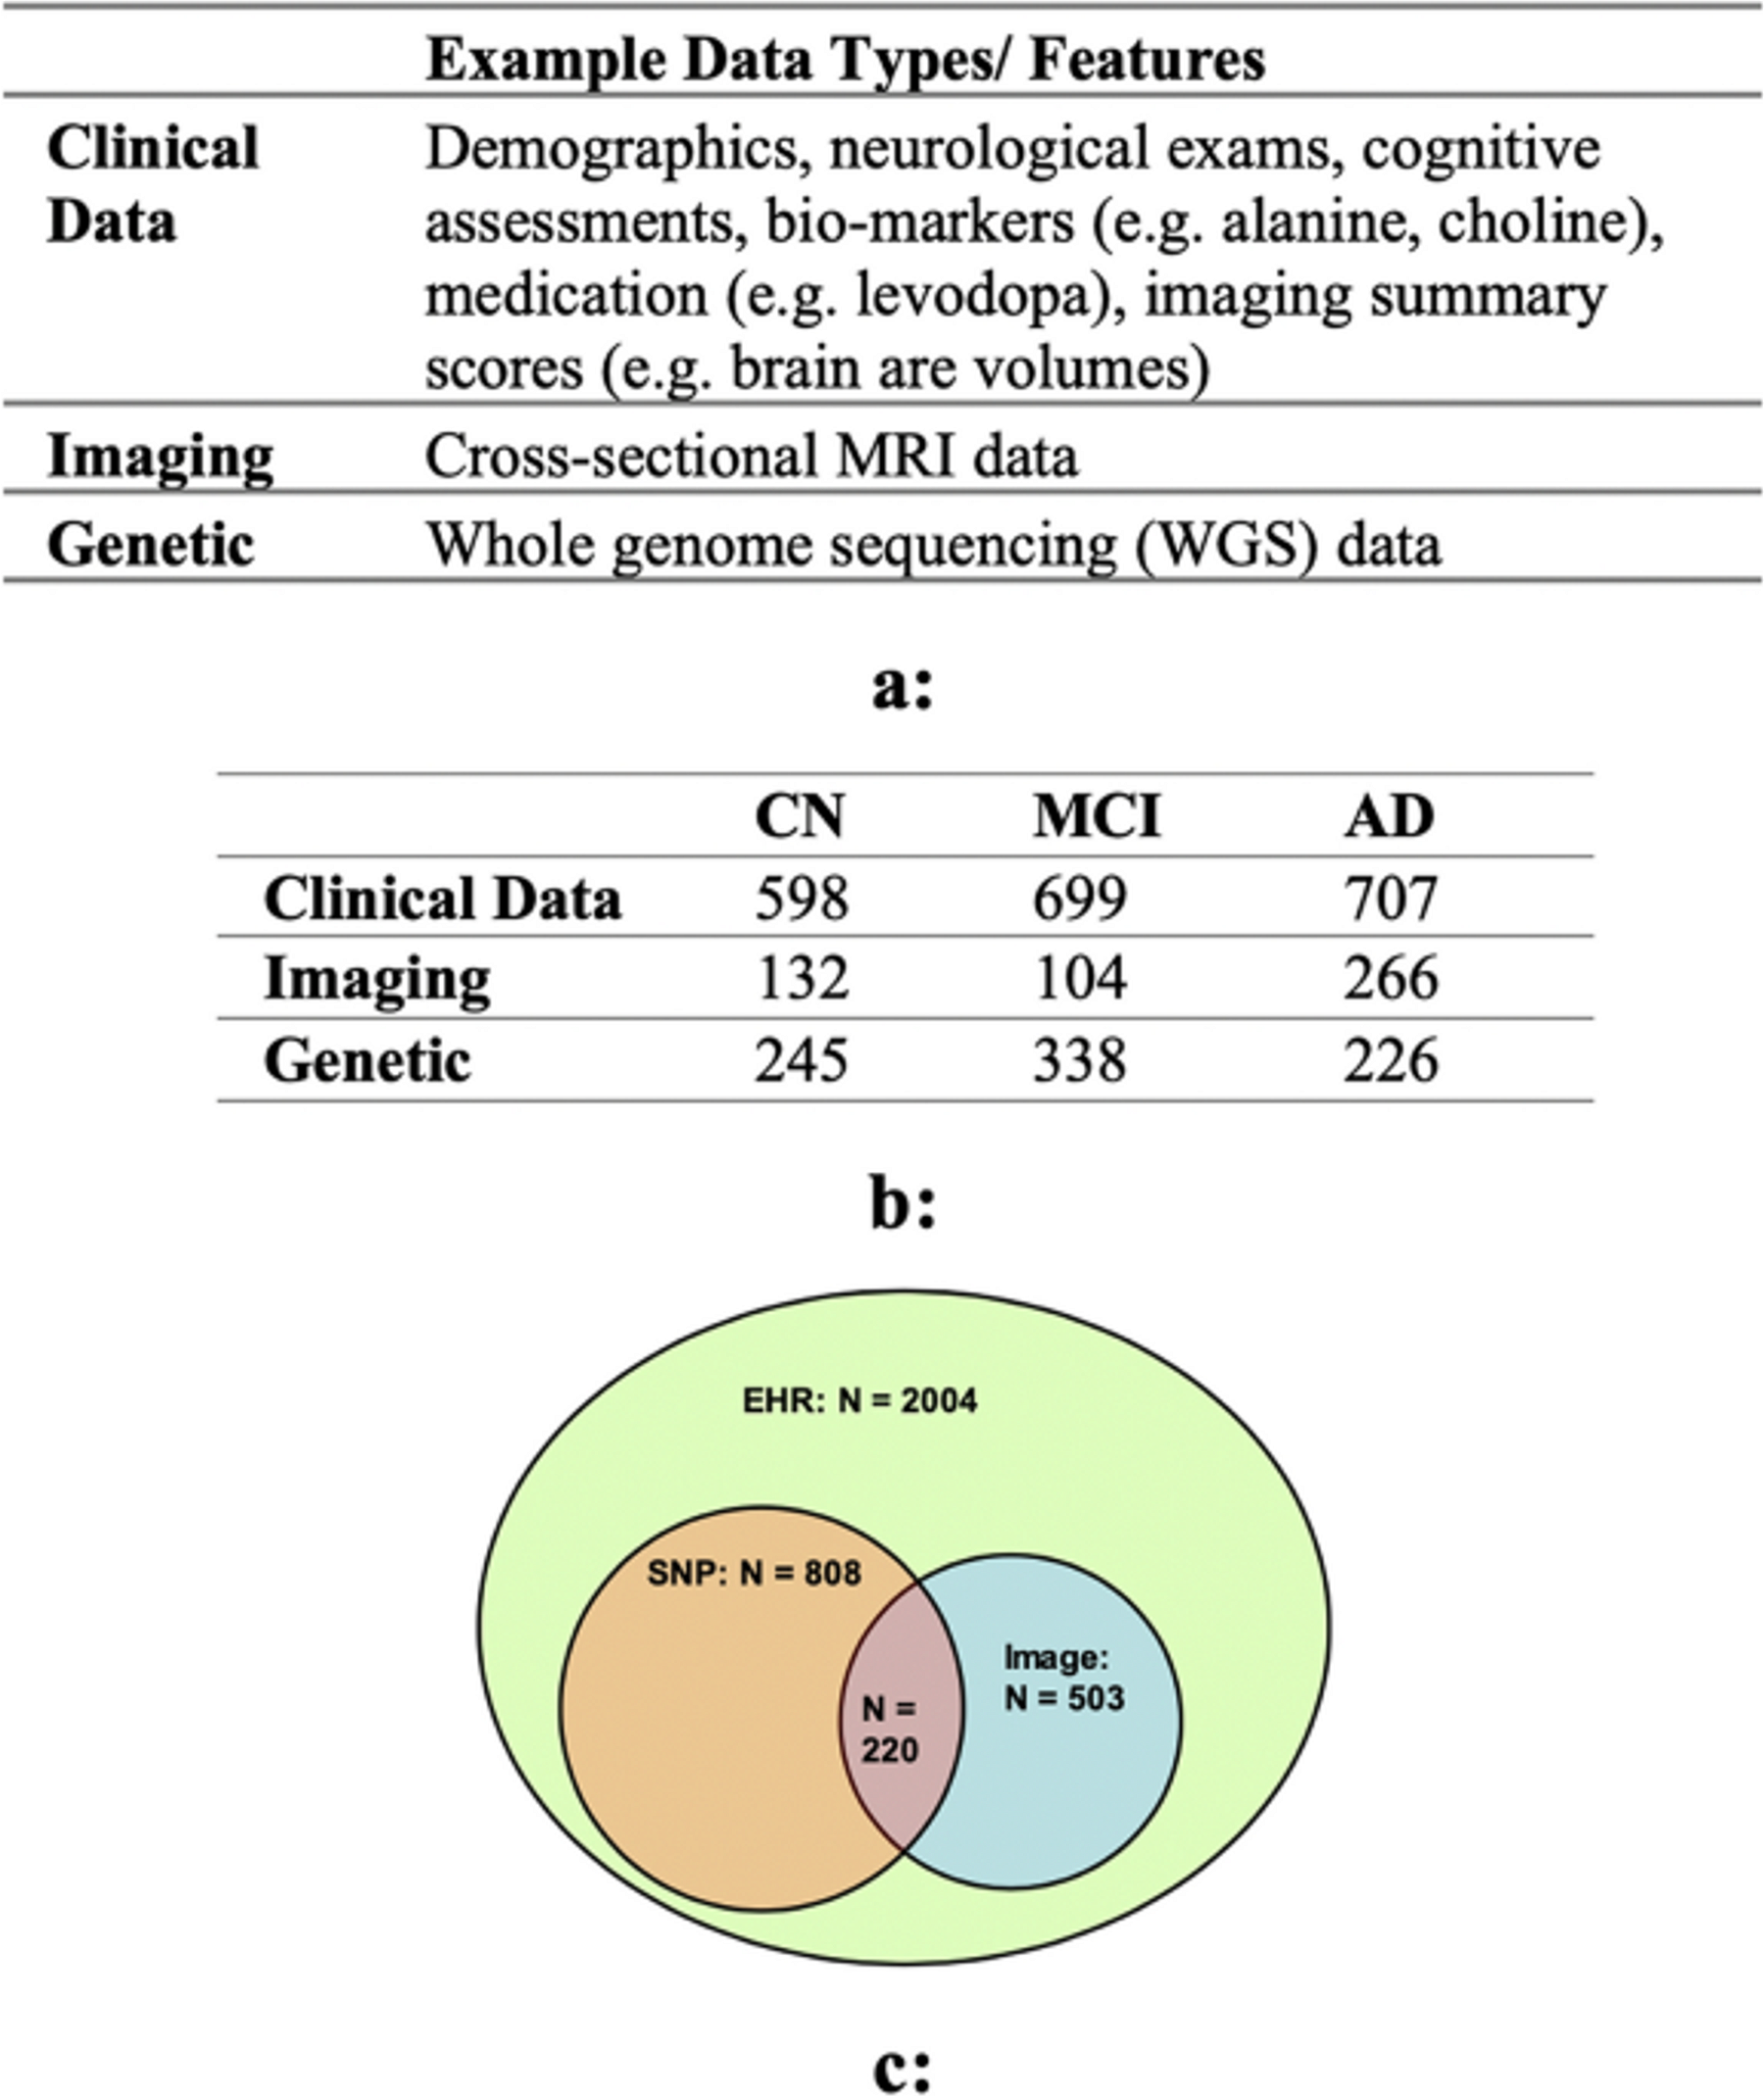 Multimodal deep learning models for early detection of Alzheimer's disease stage - Scientific Reports